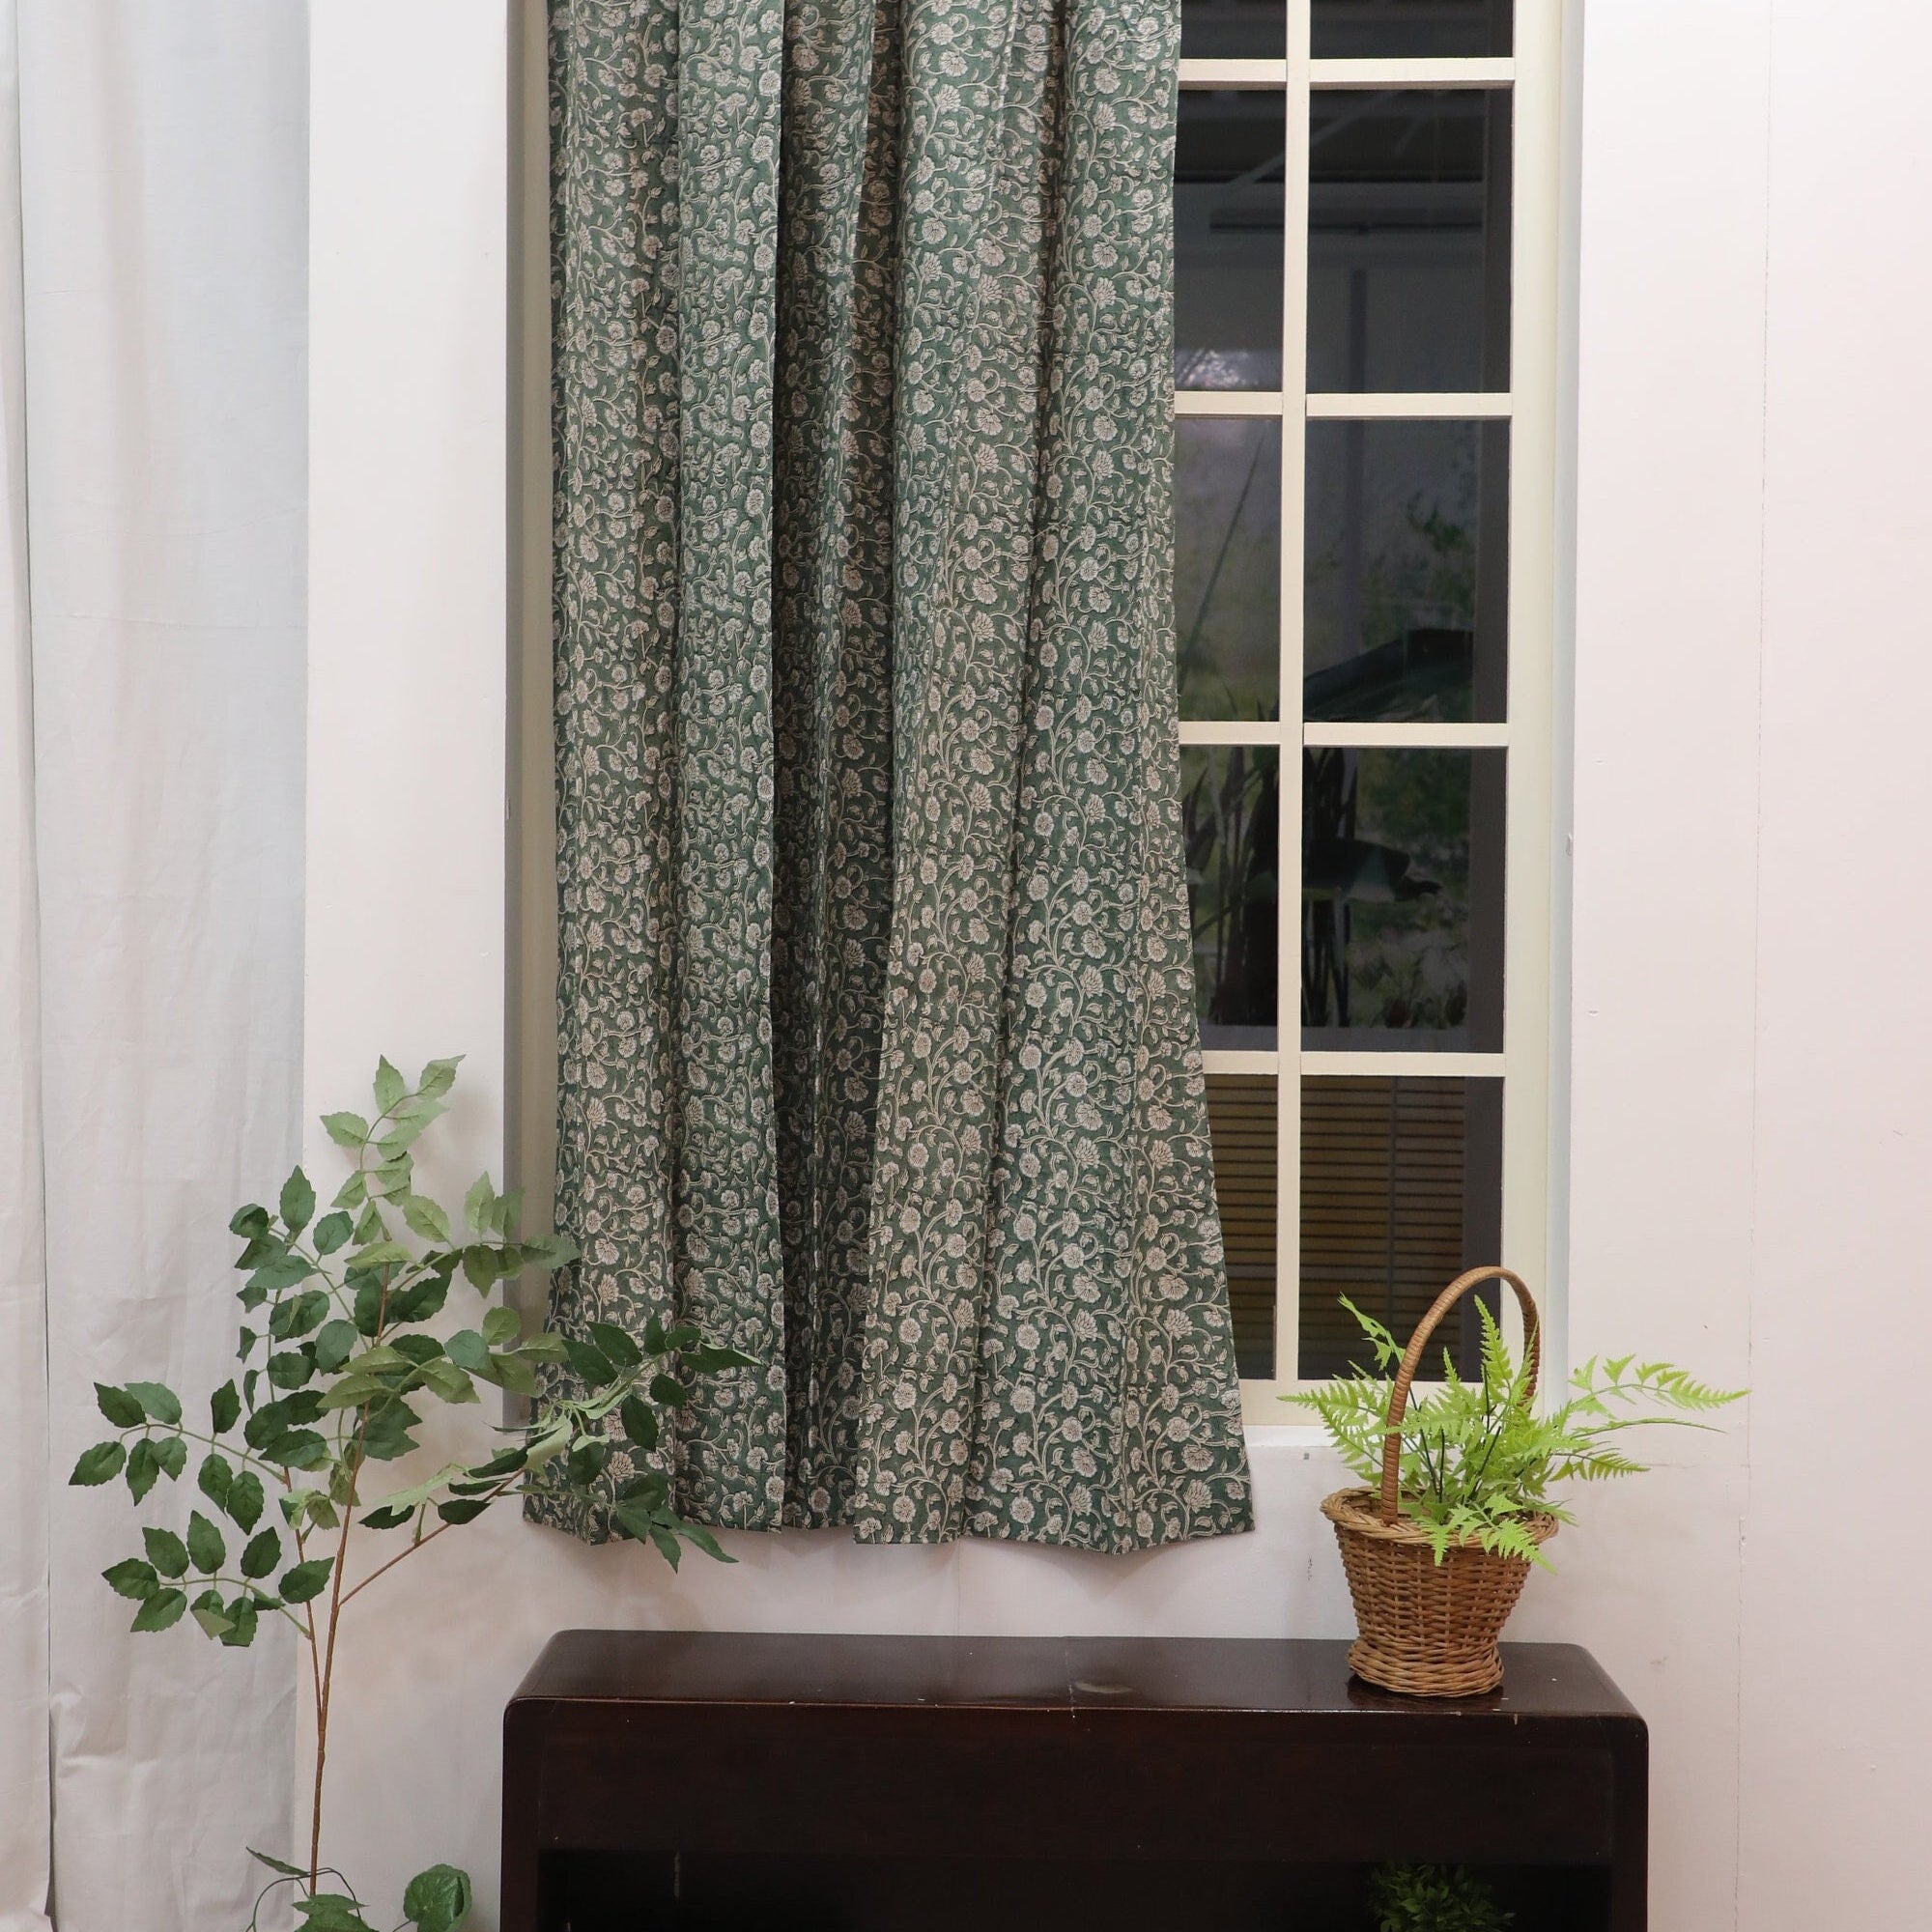 Plated Curtains, Block Print Window Floral Curtains, Fabric for Valance and treatments, Curtains Panel - HIMACHAL